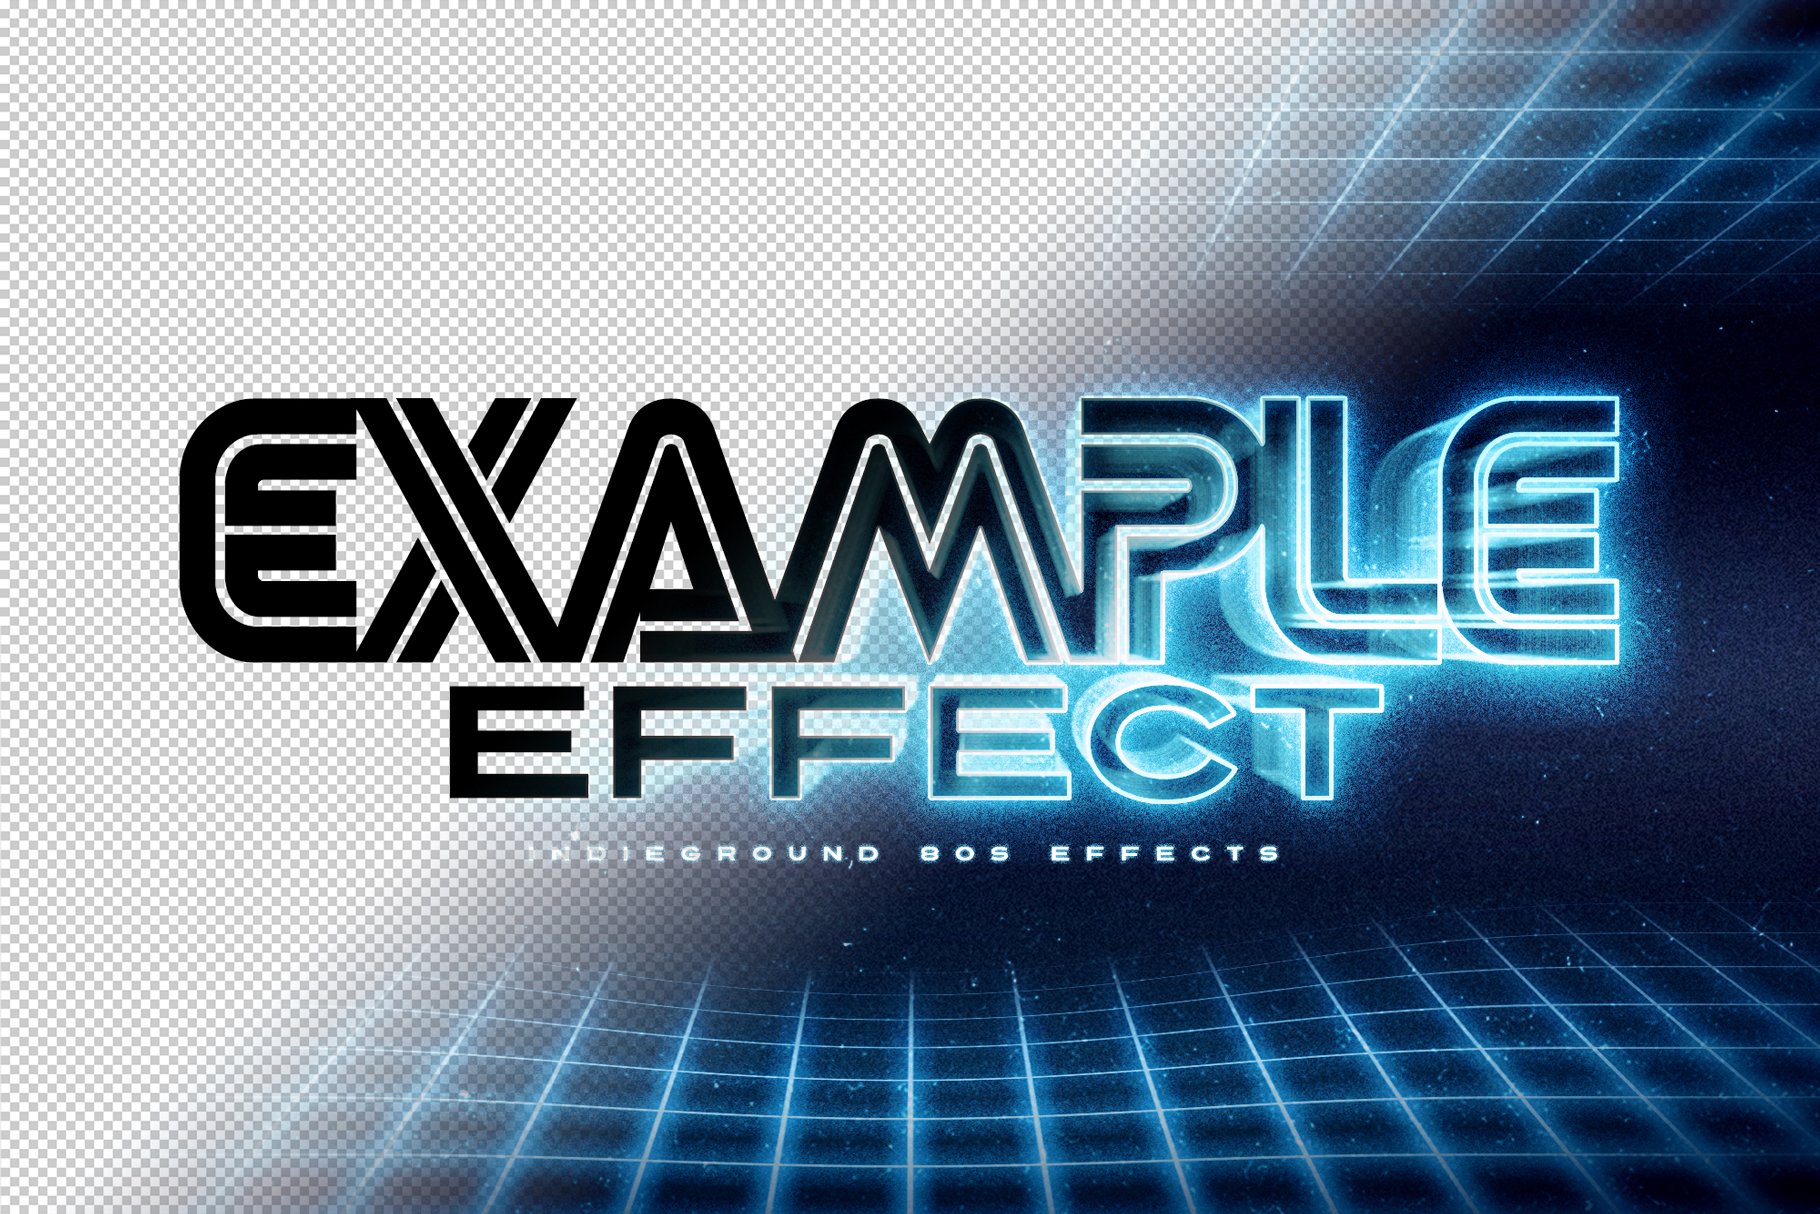 cm 80stexteffects example 835